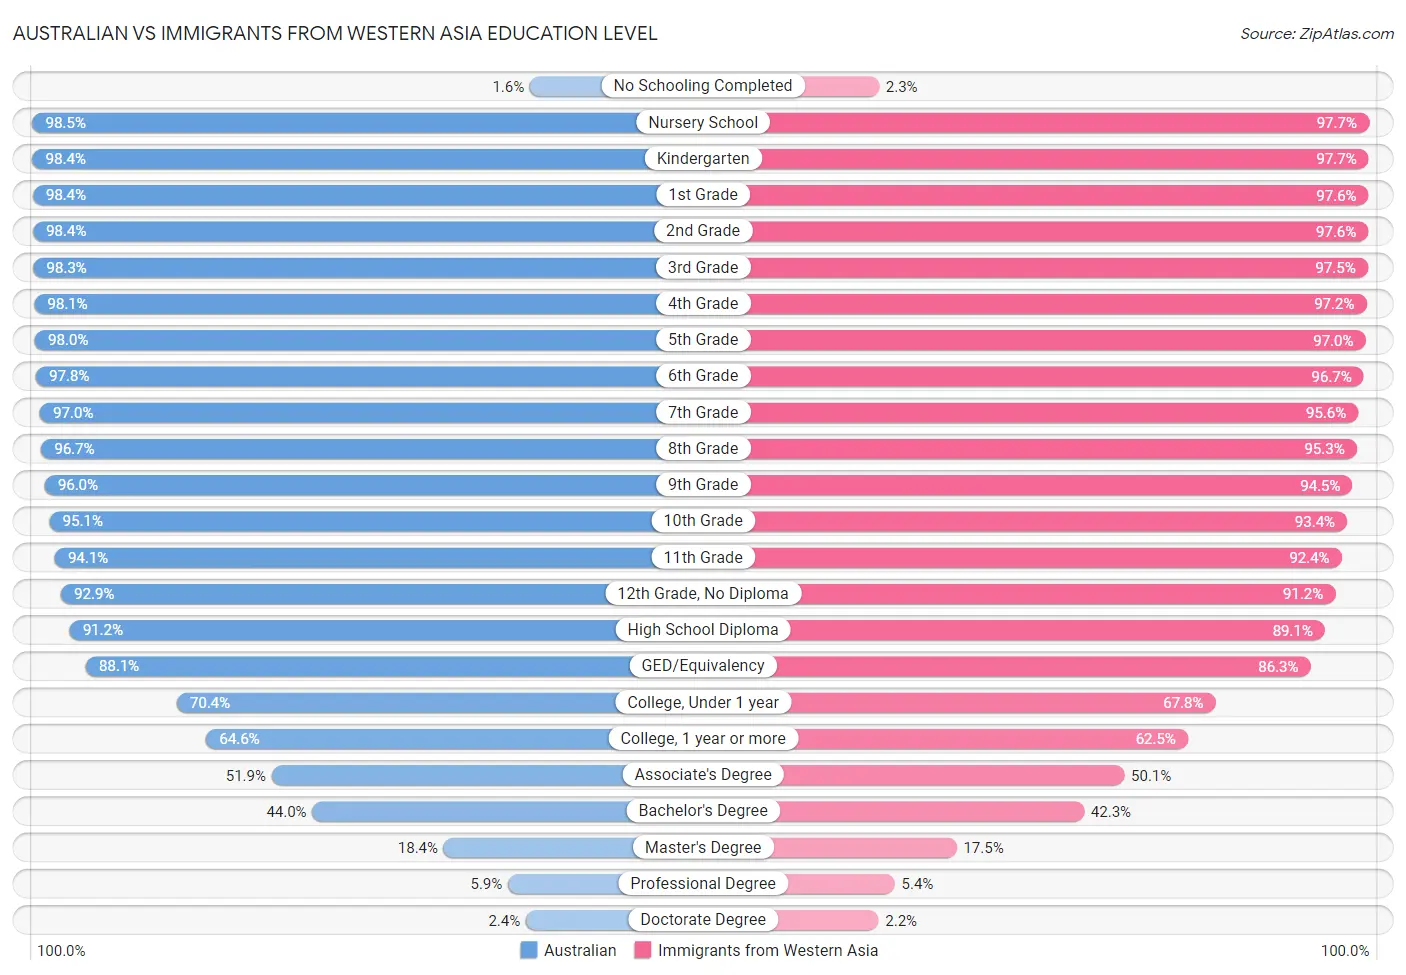 Australian vs Immigrants from Western Asia Education Level